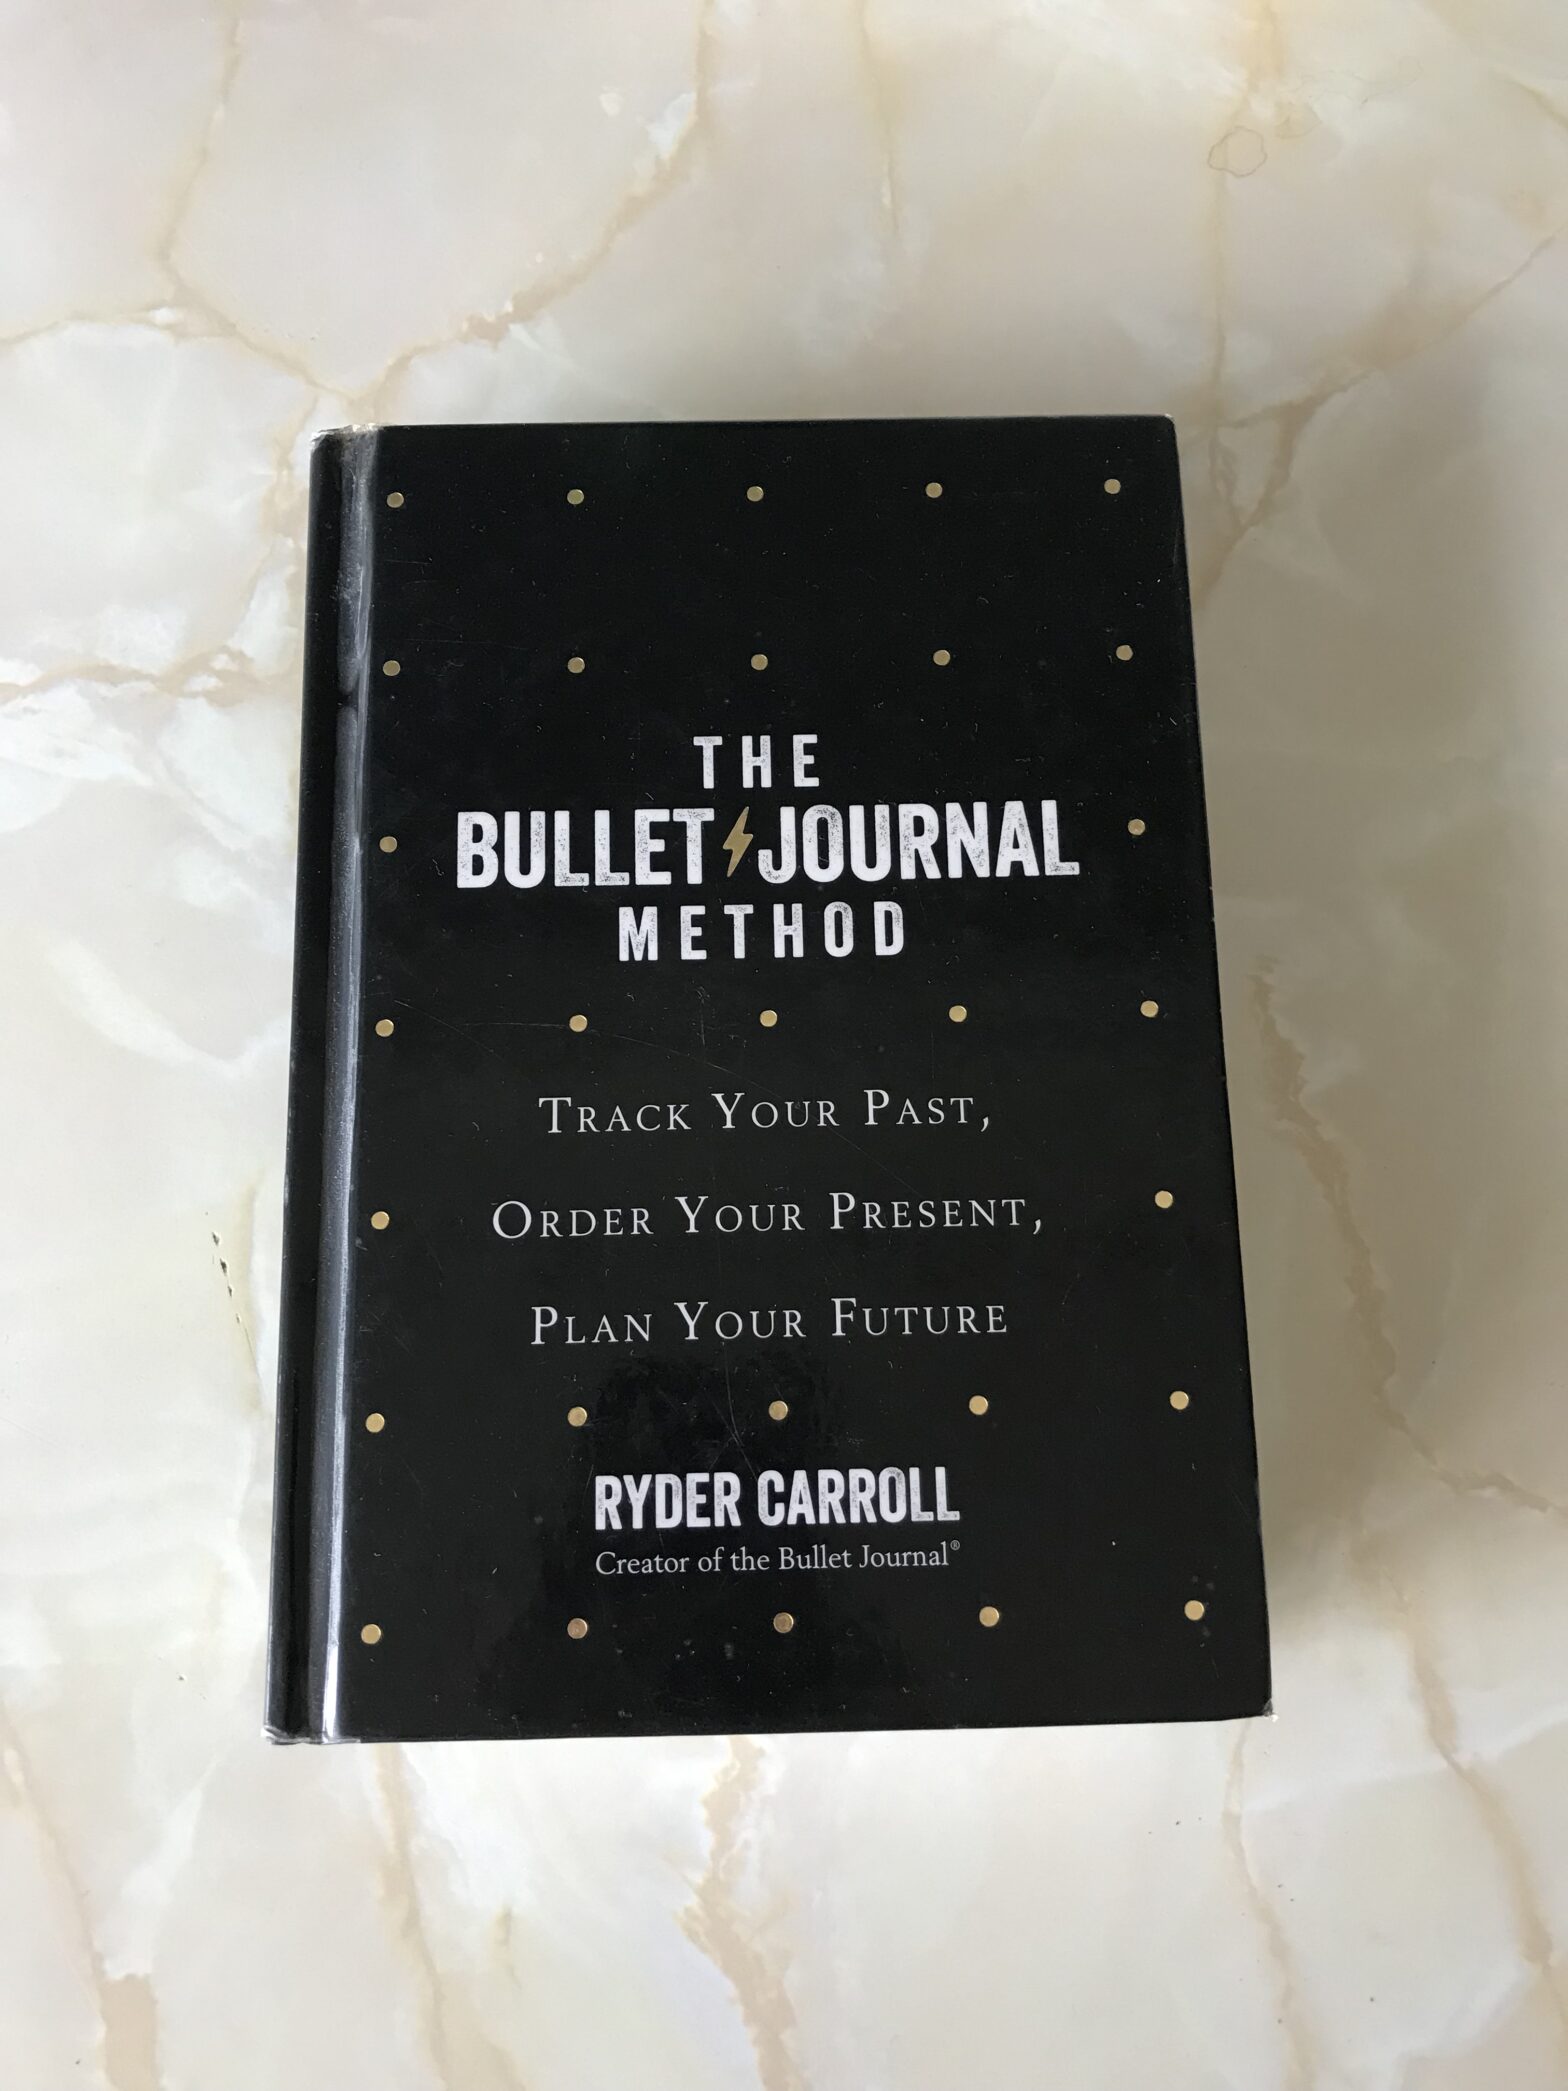 A picture of the book The Bullet Journal Method displayed on a marble background